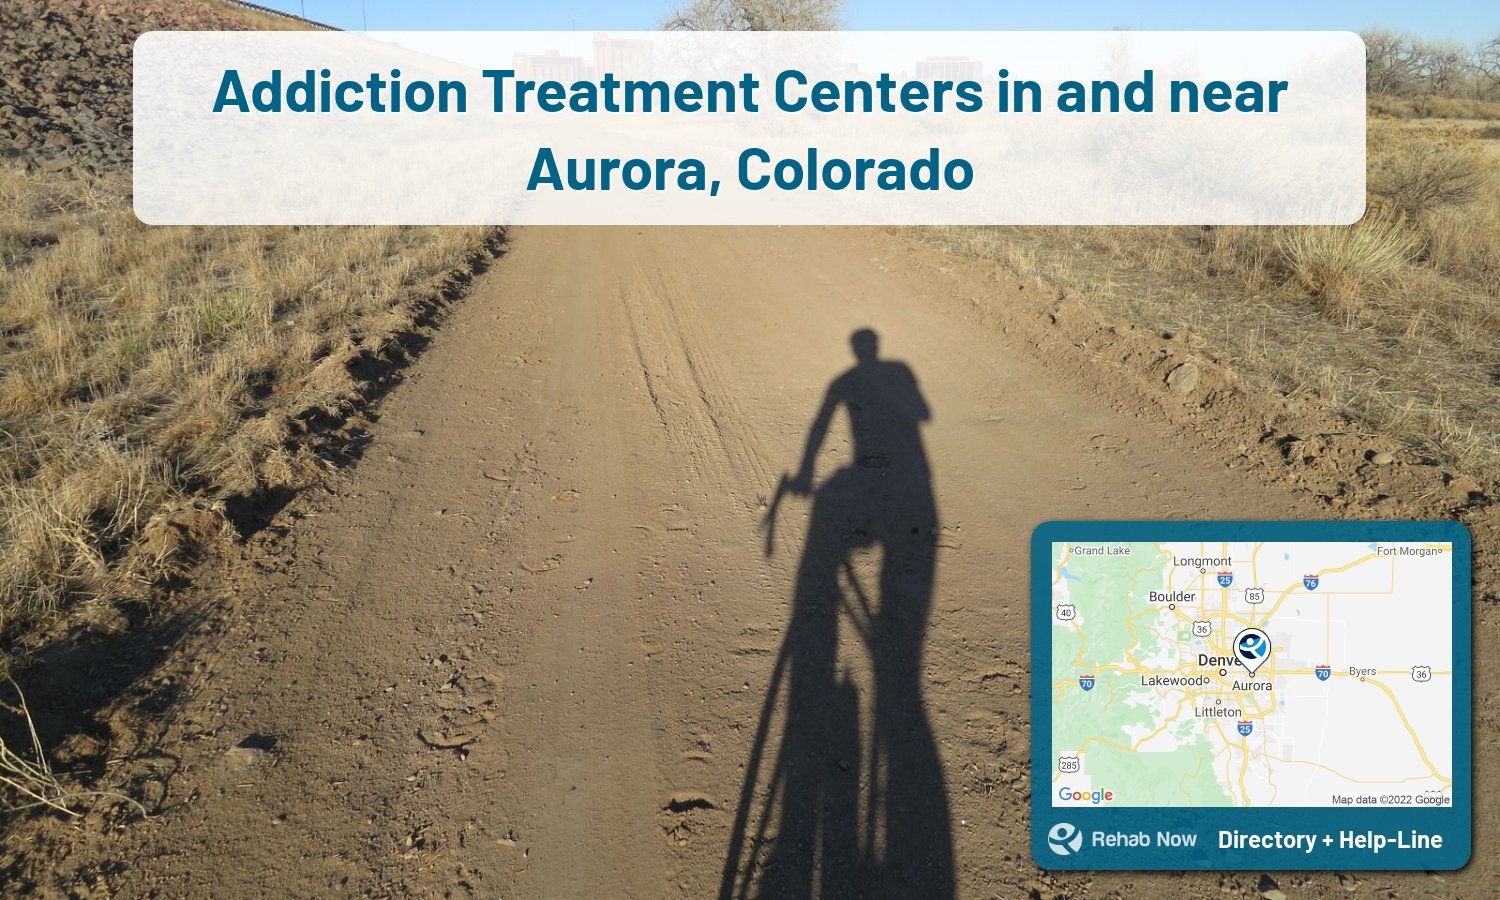 Our experts can help you find treatment now in Aurora, Colorado. We list drug rehab and alcohol centers in Colorado.